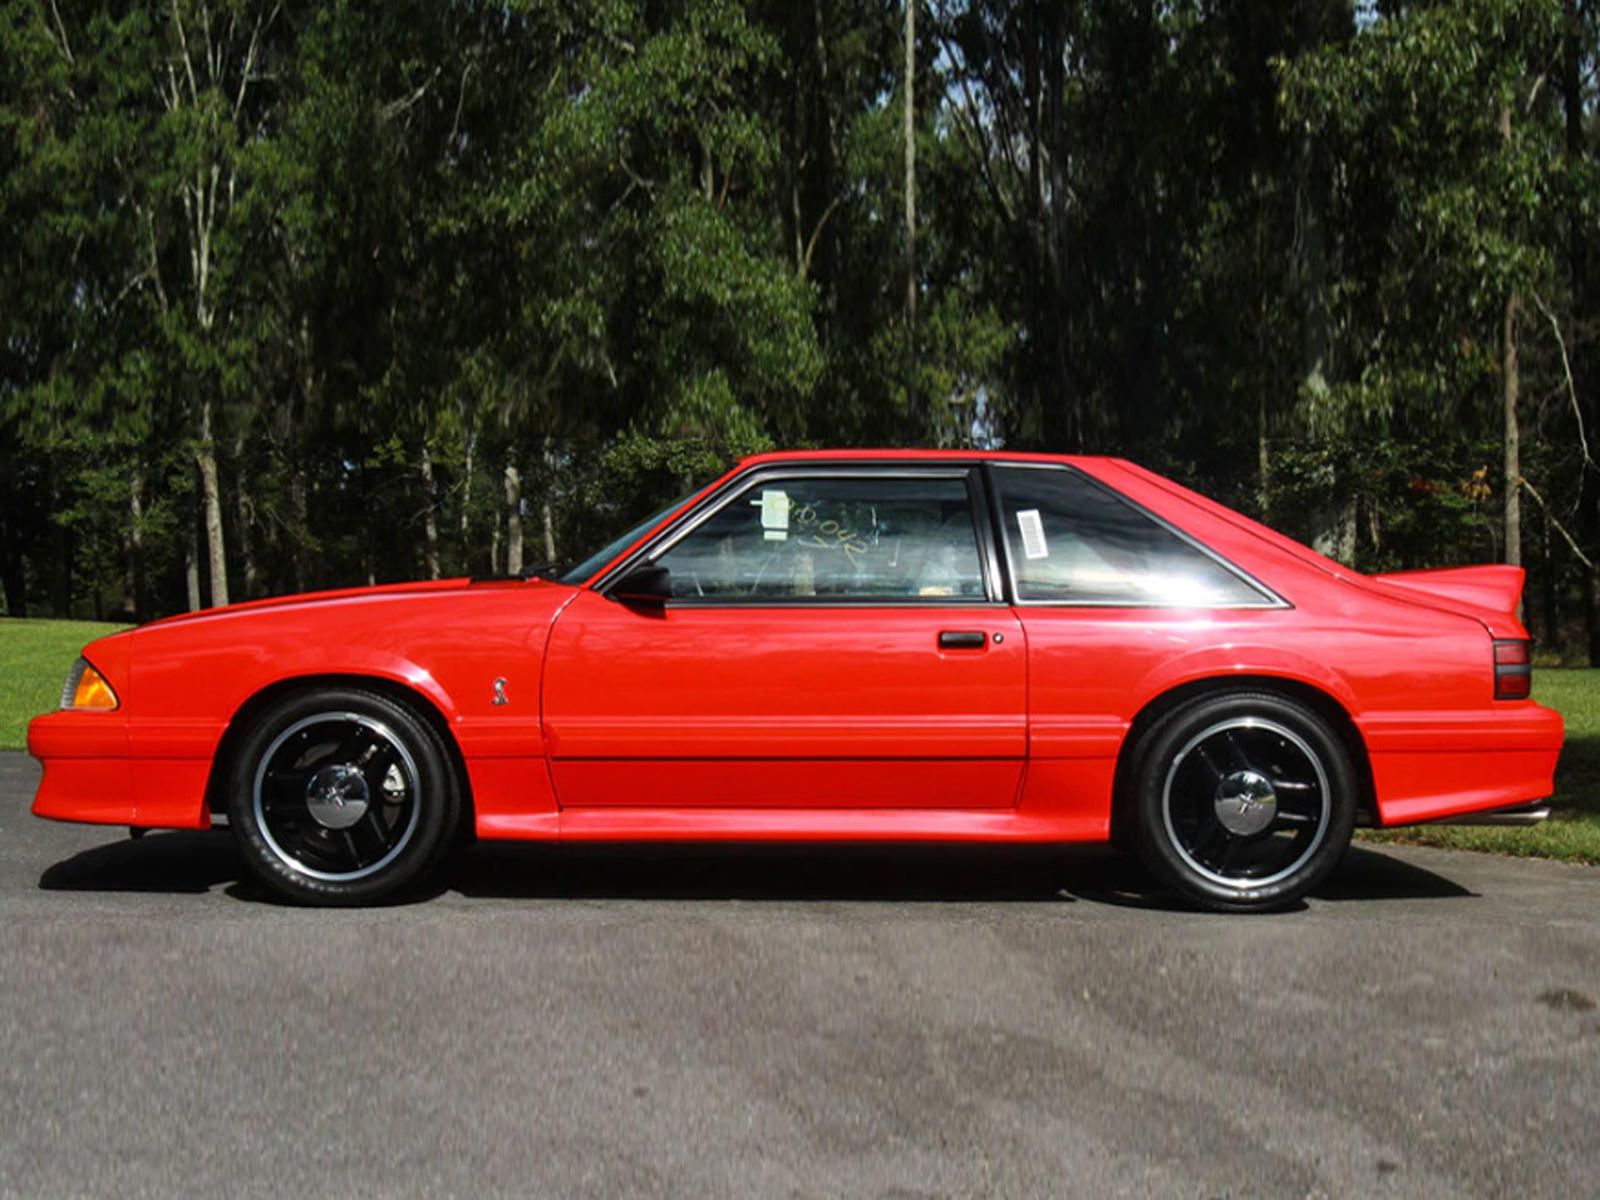 Fox Body Mustang on the road